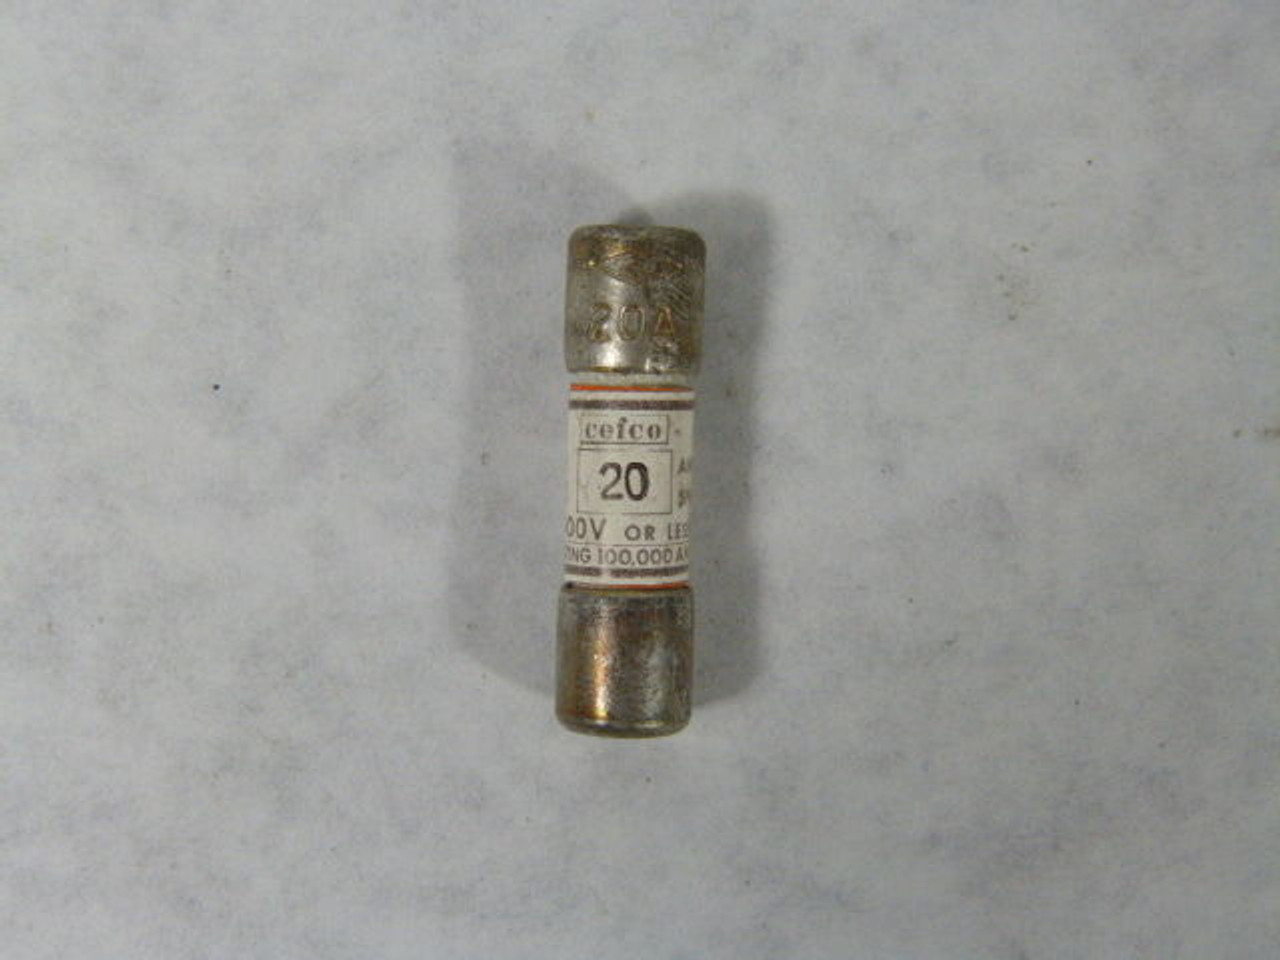 Bussmann CTK-20 Fast Acting Fuse 20A 600V USED